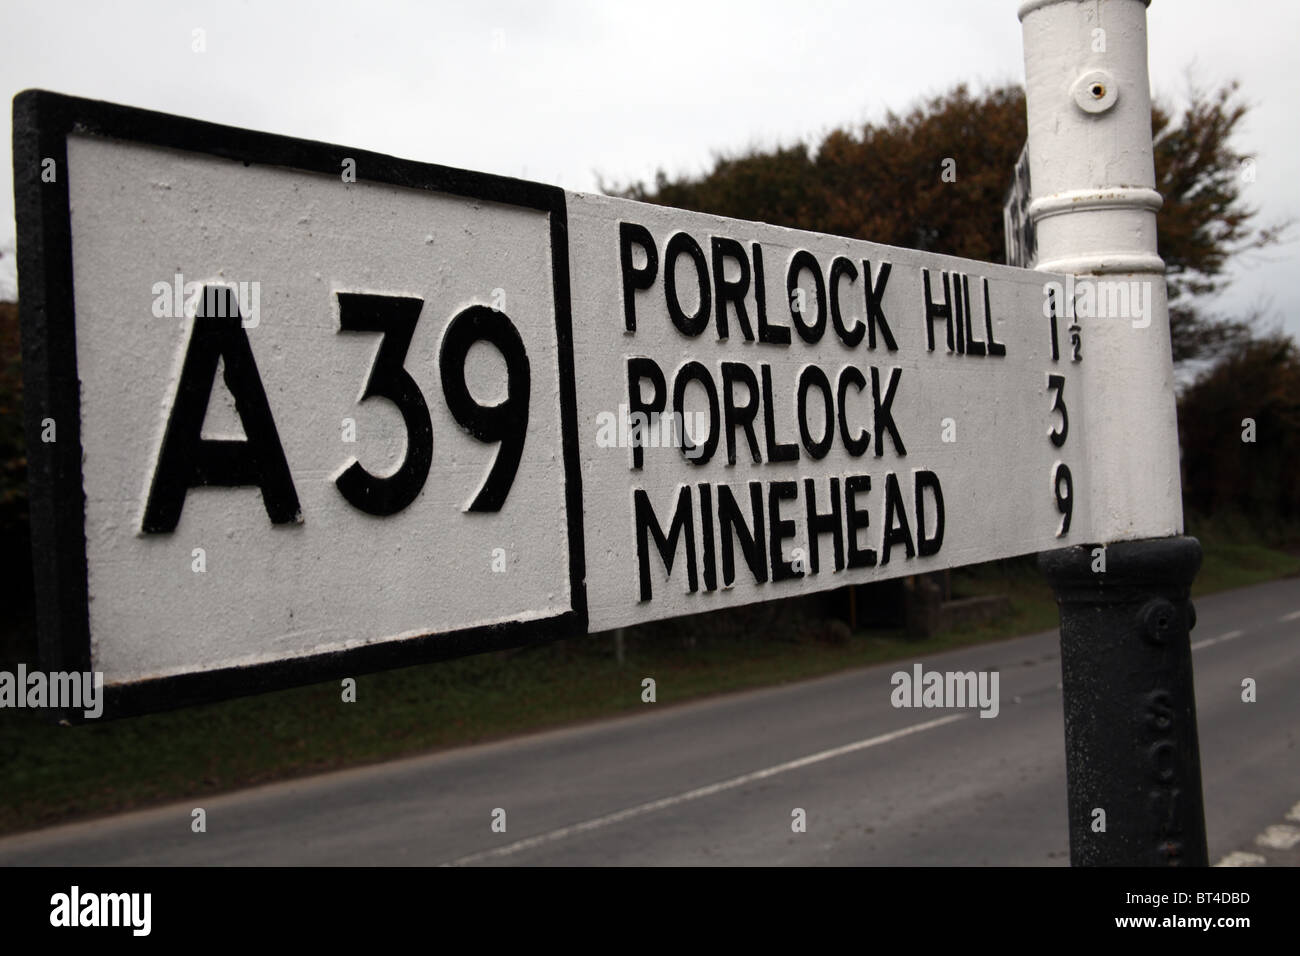 Old fashioned road direction sign, Porlock Hill, Somerset, England Stock Photo